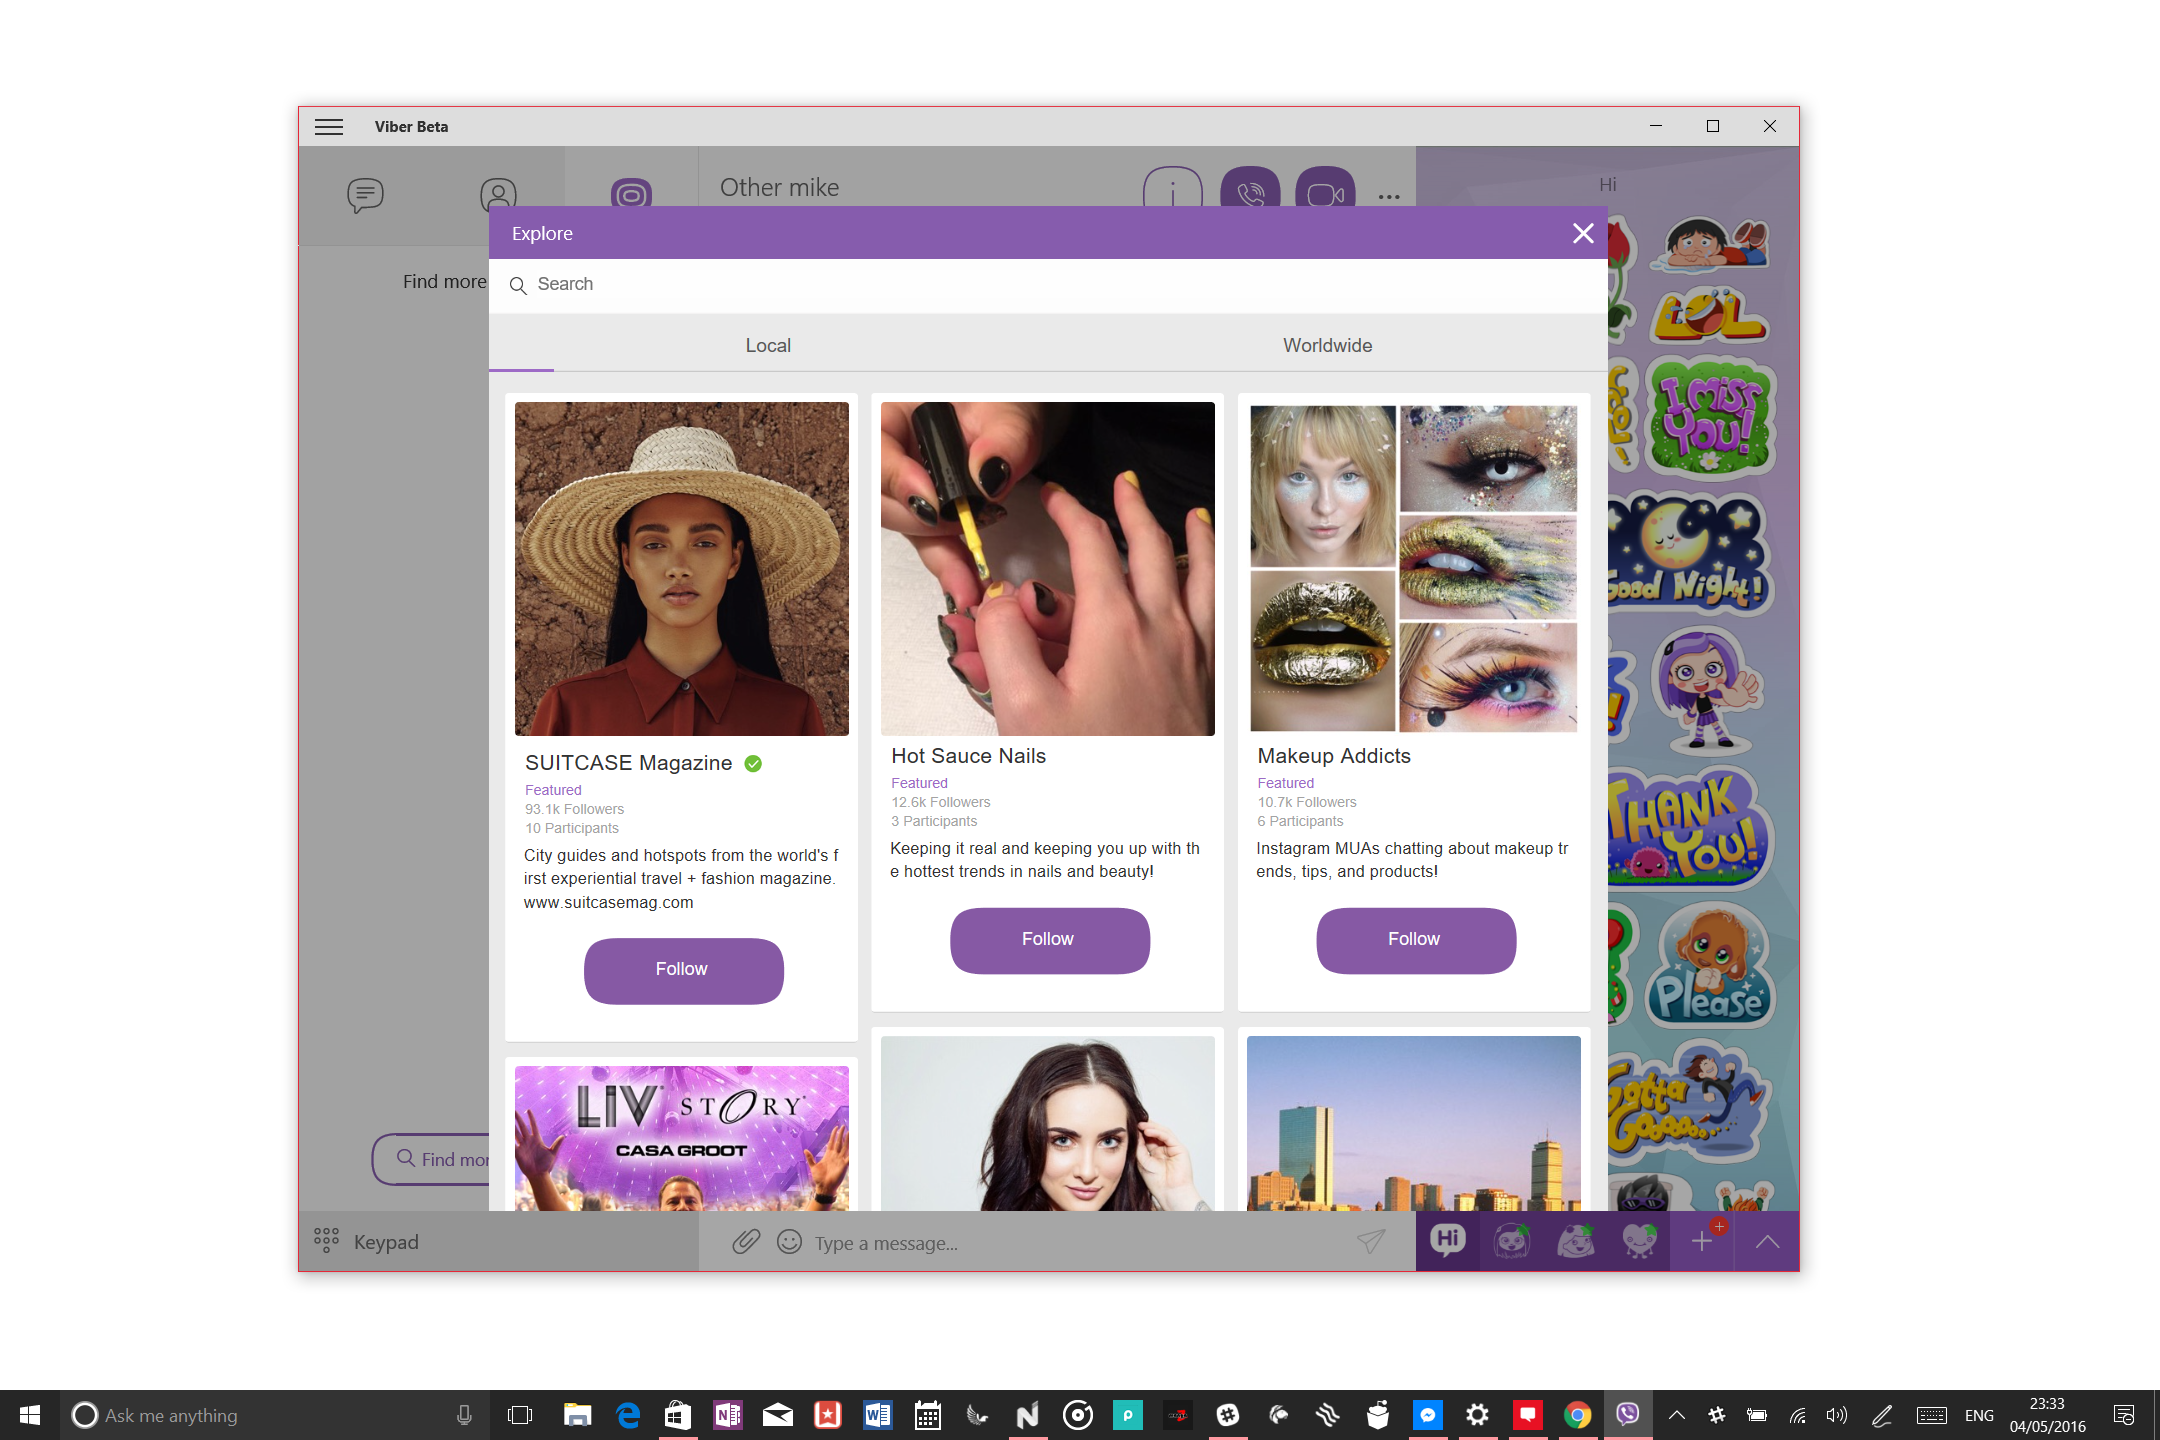 latest and spelling corrector viber for window 7